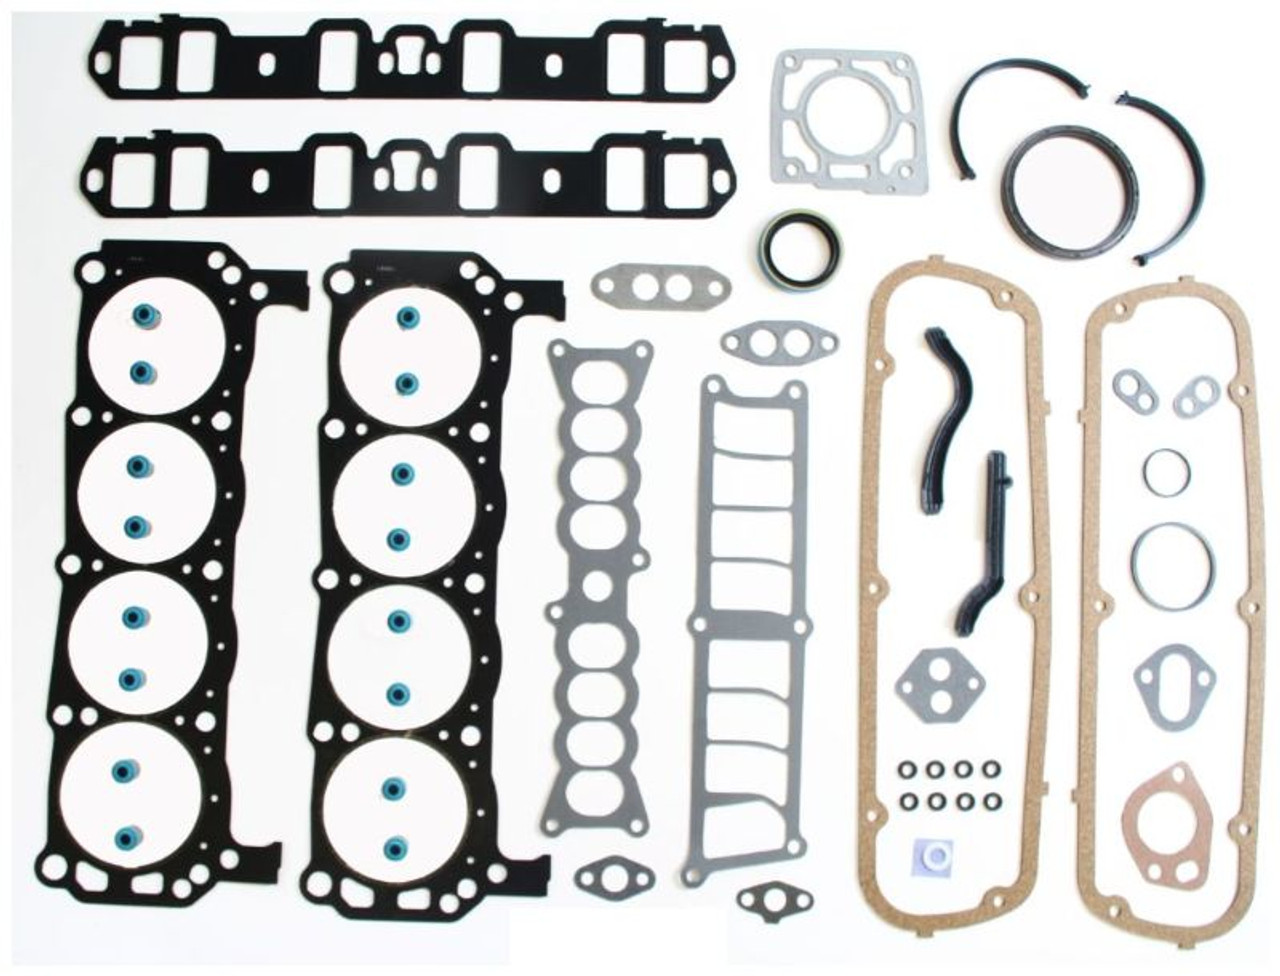 1995 Ford Mustang 5.0L Engine Gasket Set F302A-1 -22